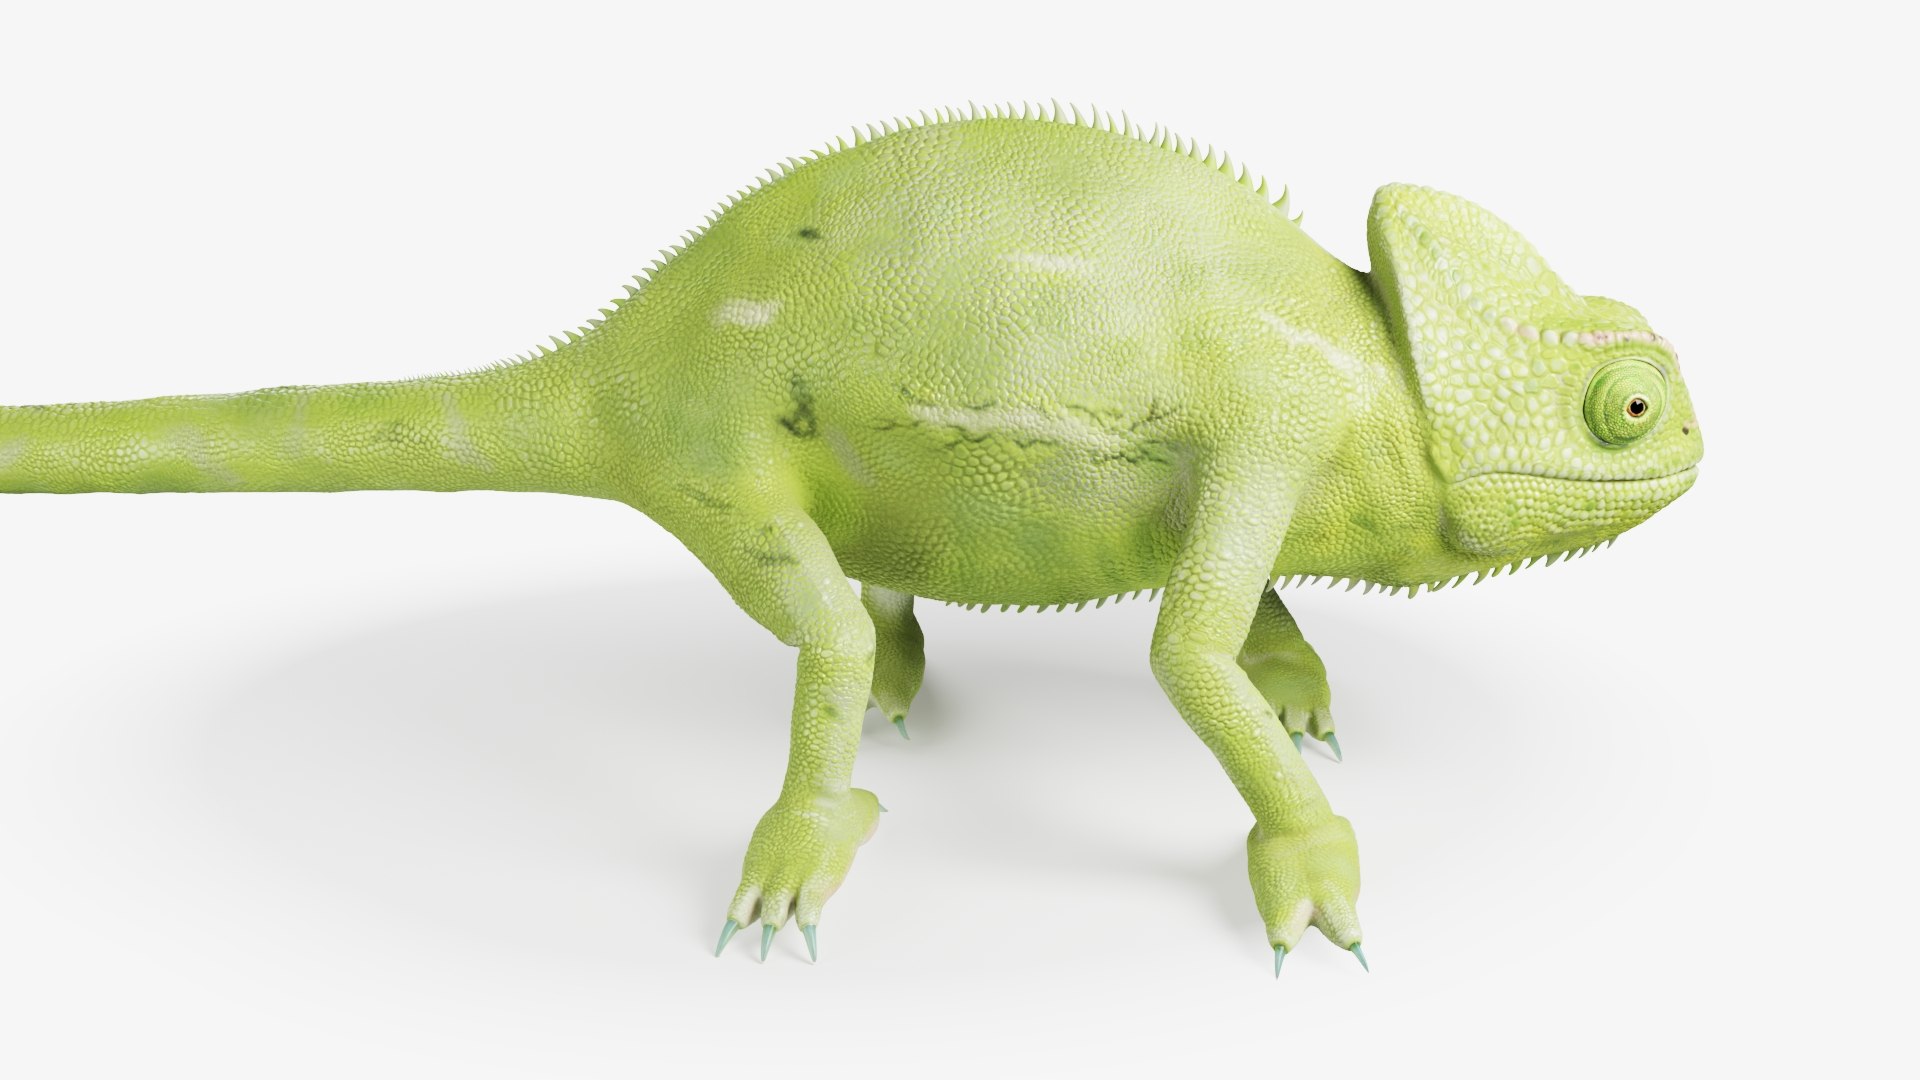 3D modelling is helping researchers understand how chameleons